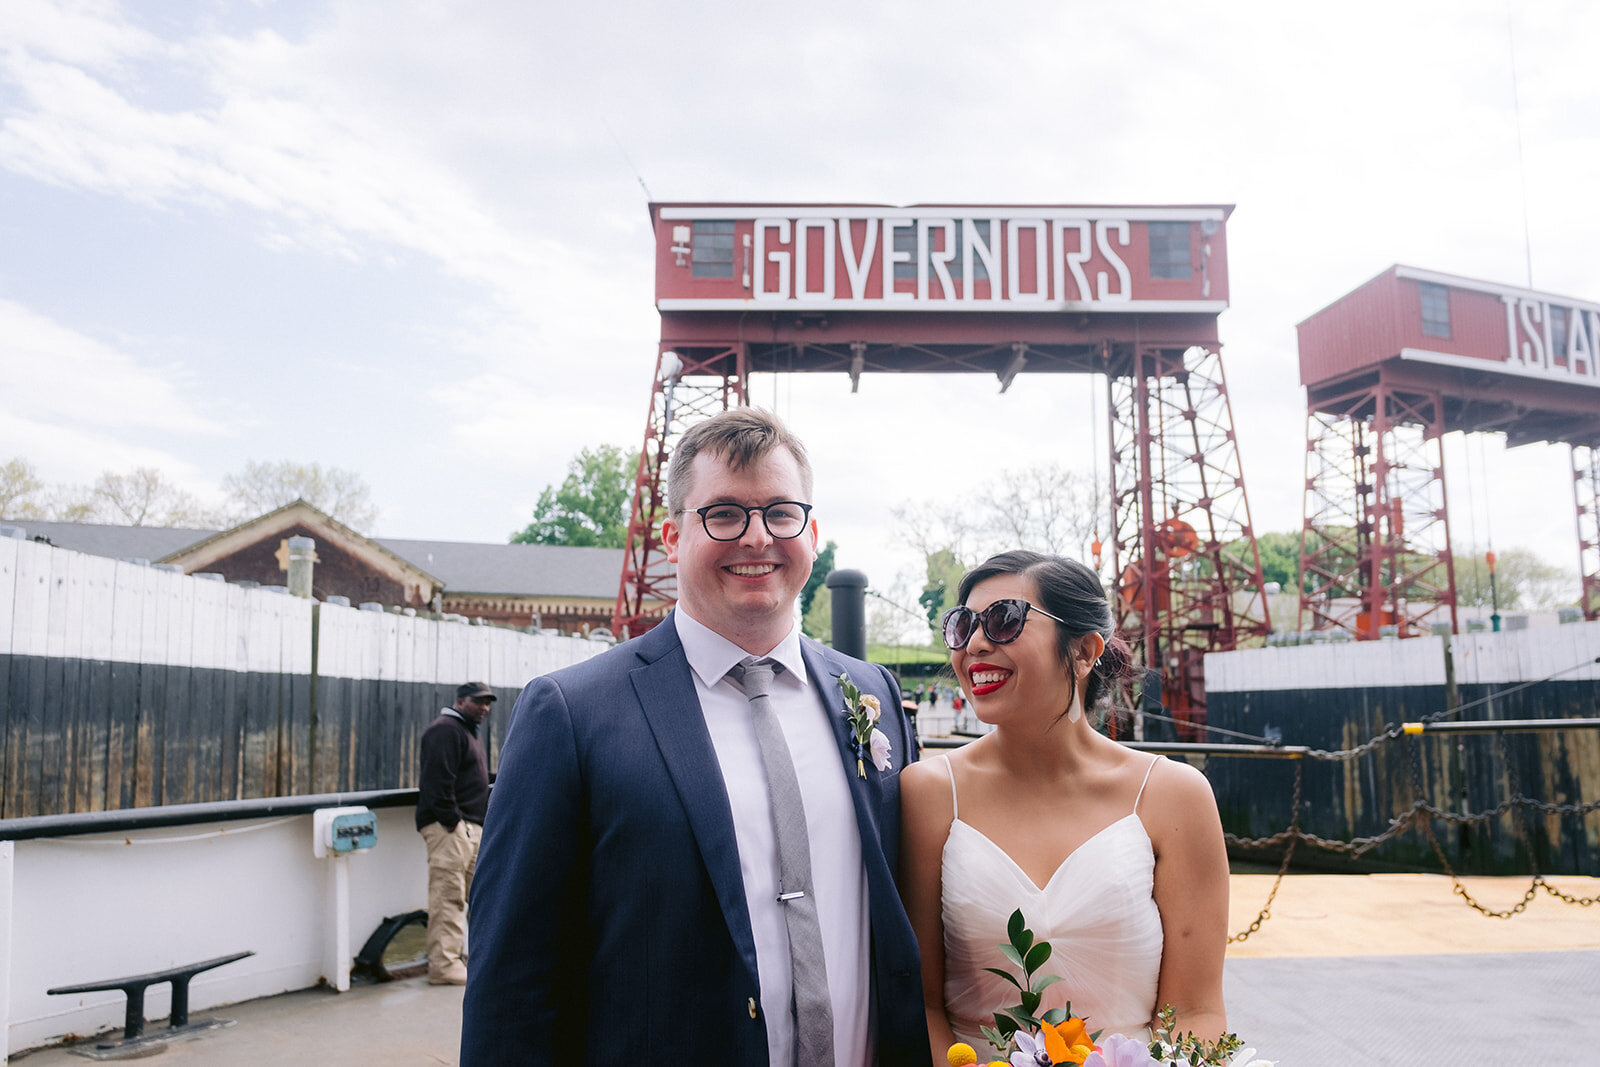 Intimate-Wedding-Ideas-in-NYC-Governors-Island-12